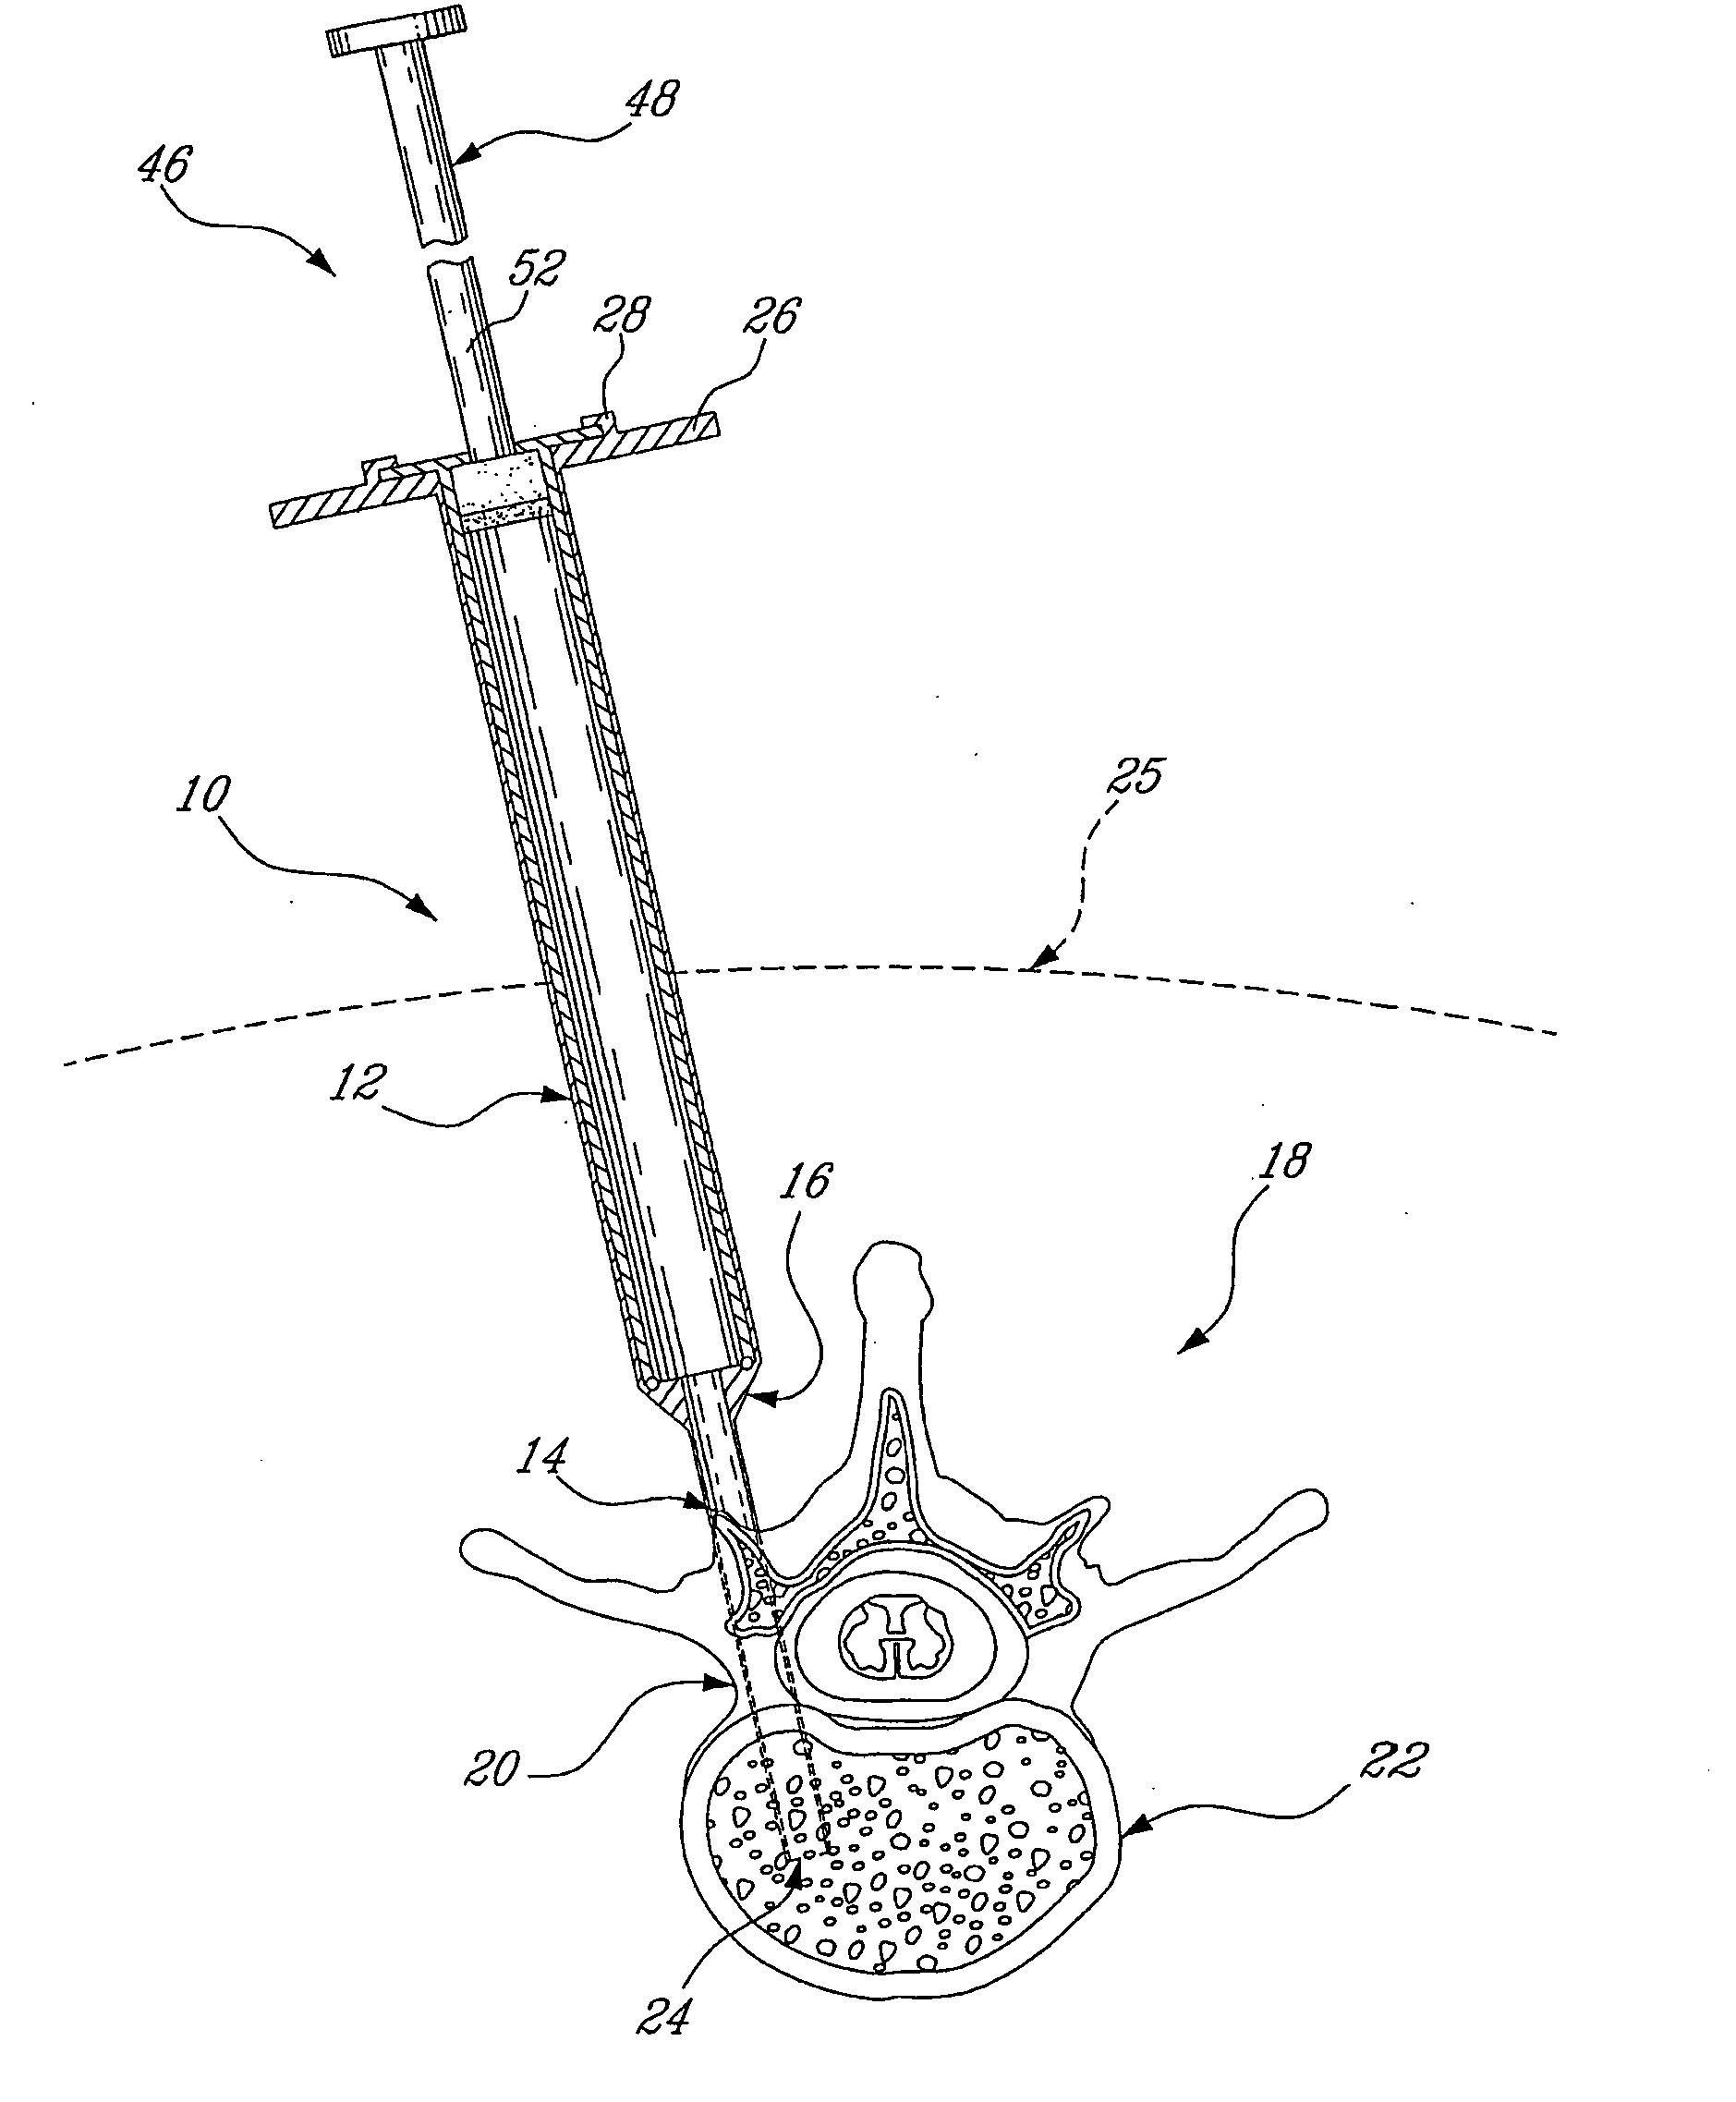 Device for injecting a viscous material into a hard tissue